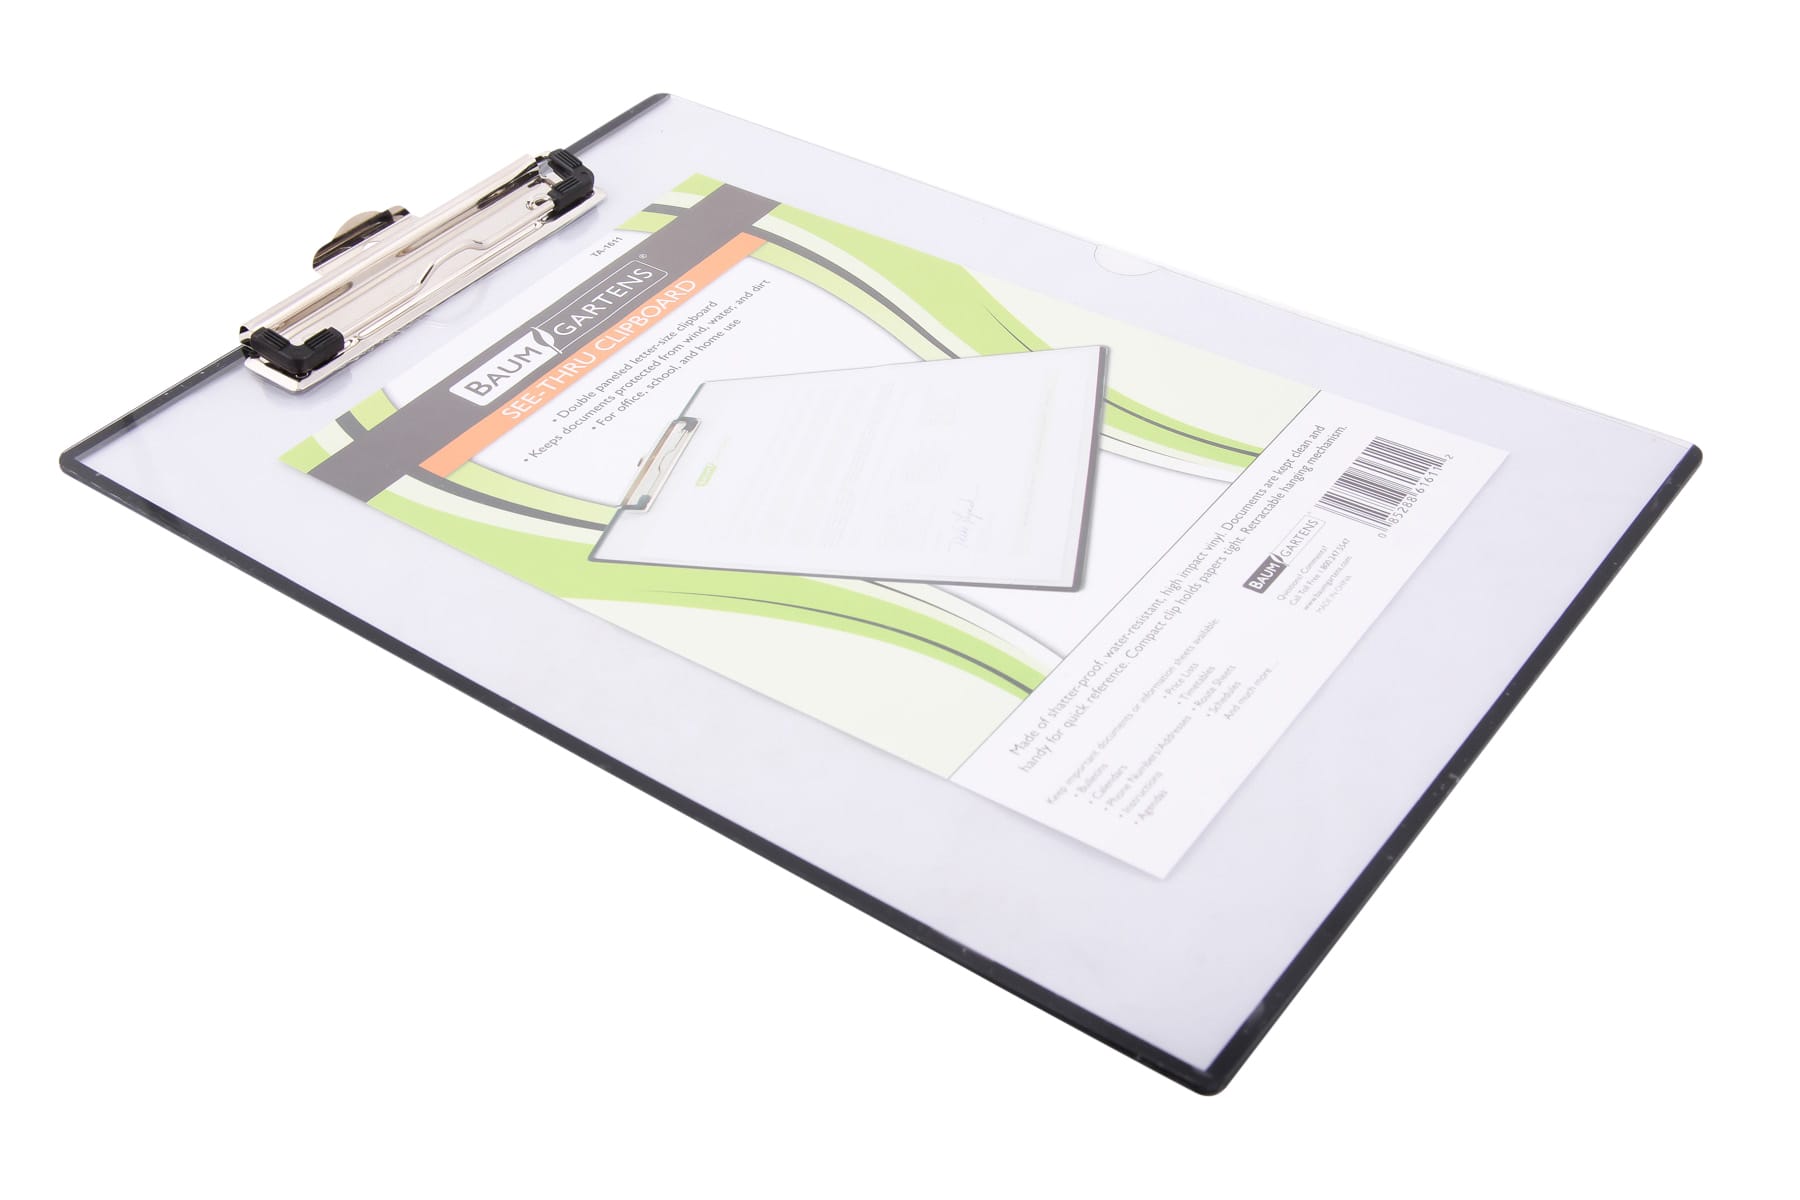 Mobile Ops Unbreakable Quick Reference Clipboard With Transparent Protective Cover CLEAR (TA-1611)